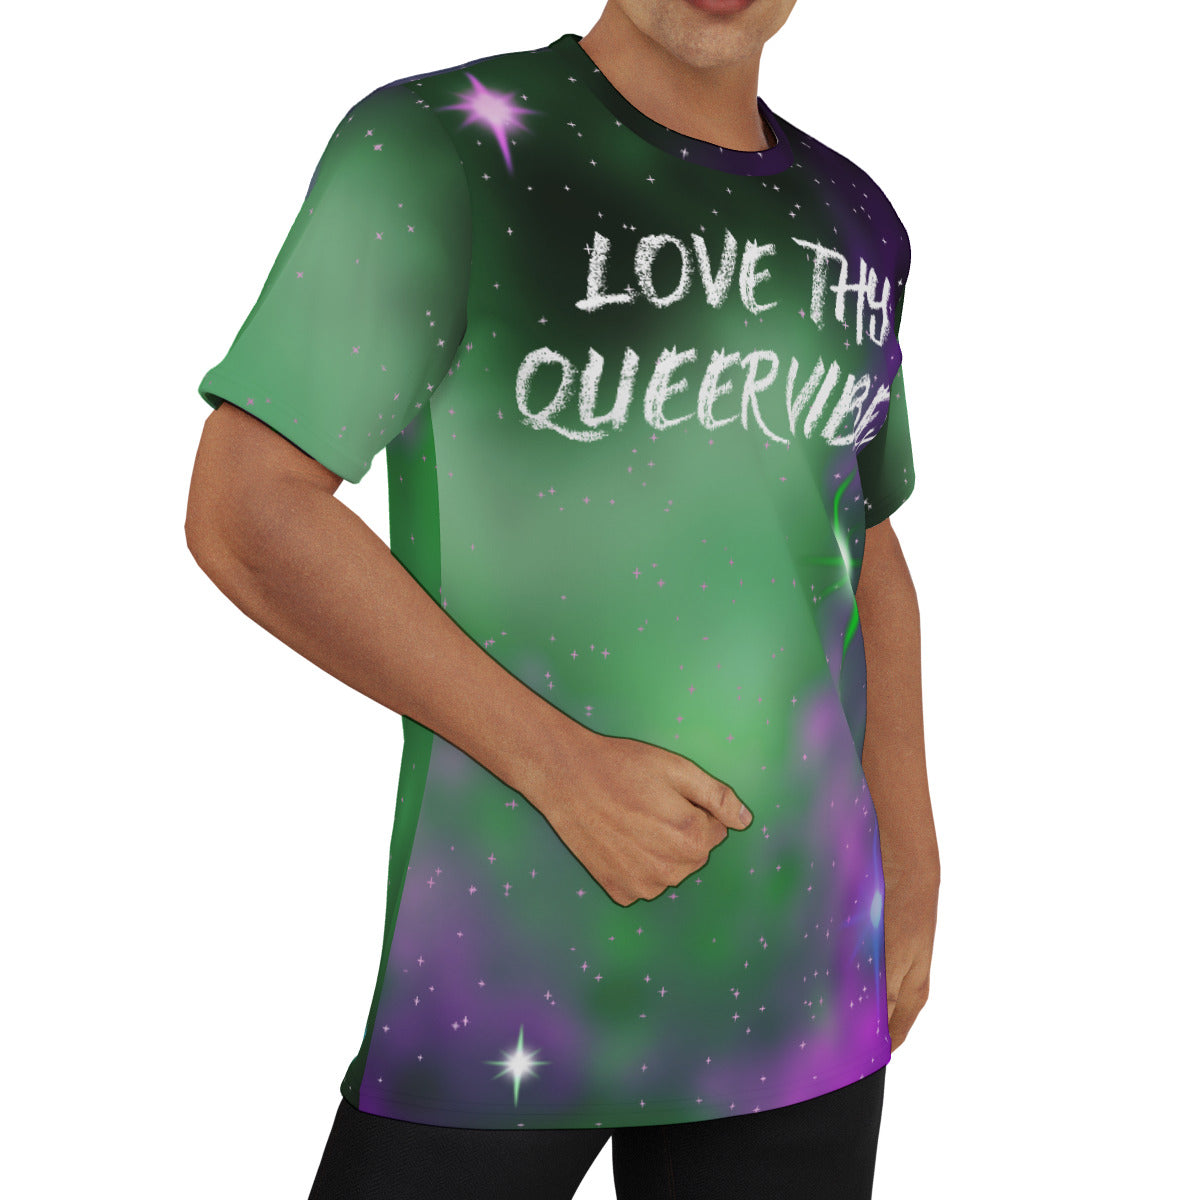 Love Thy Queer Vibes Men's O-Neck Fashion T-Shirt - The Nebula Palace